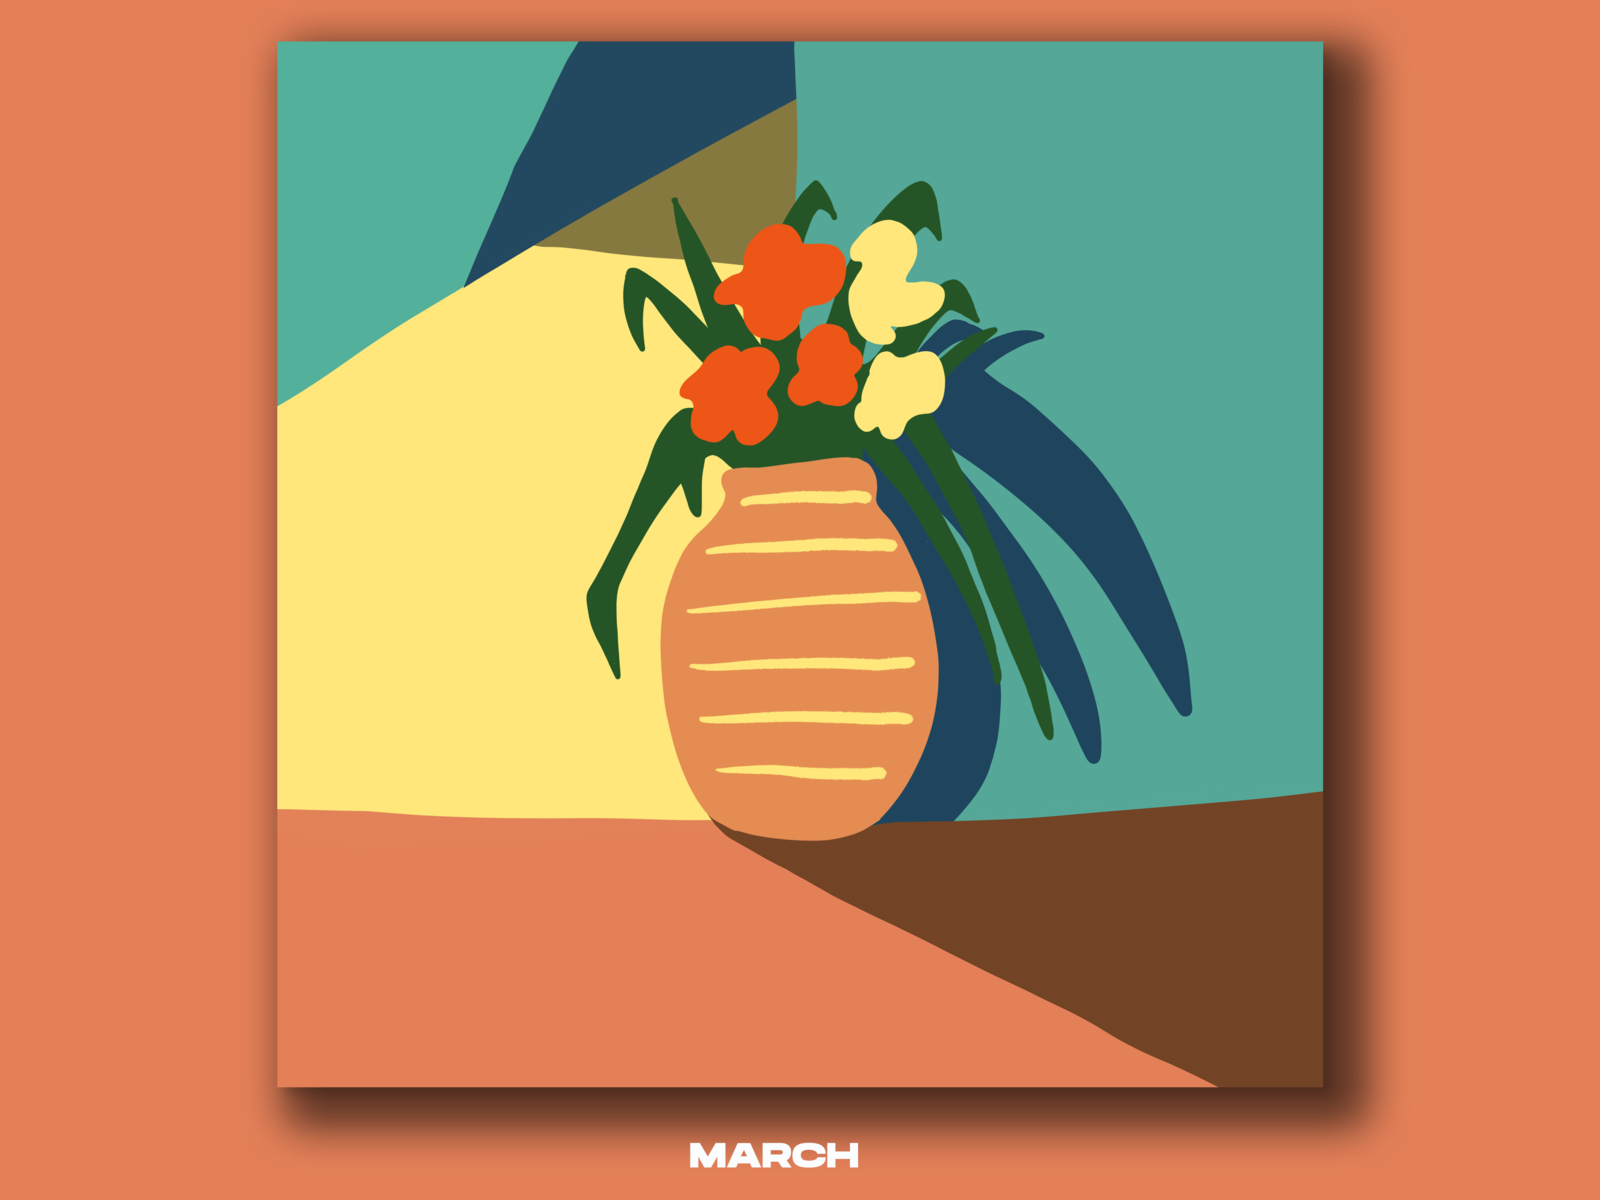 Illustration for March by Smash Studio on Dribbble